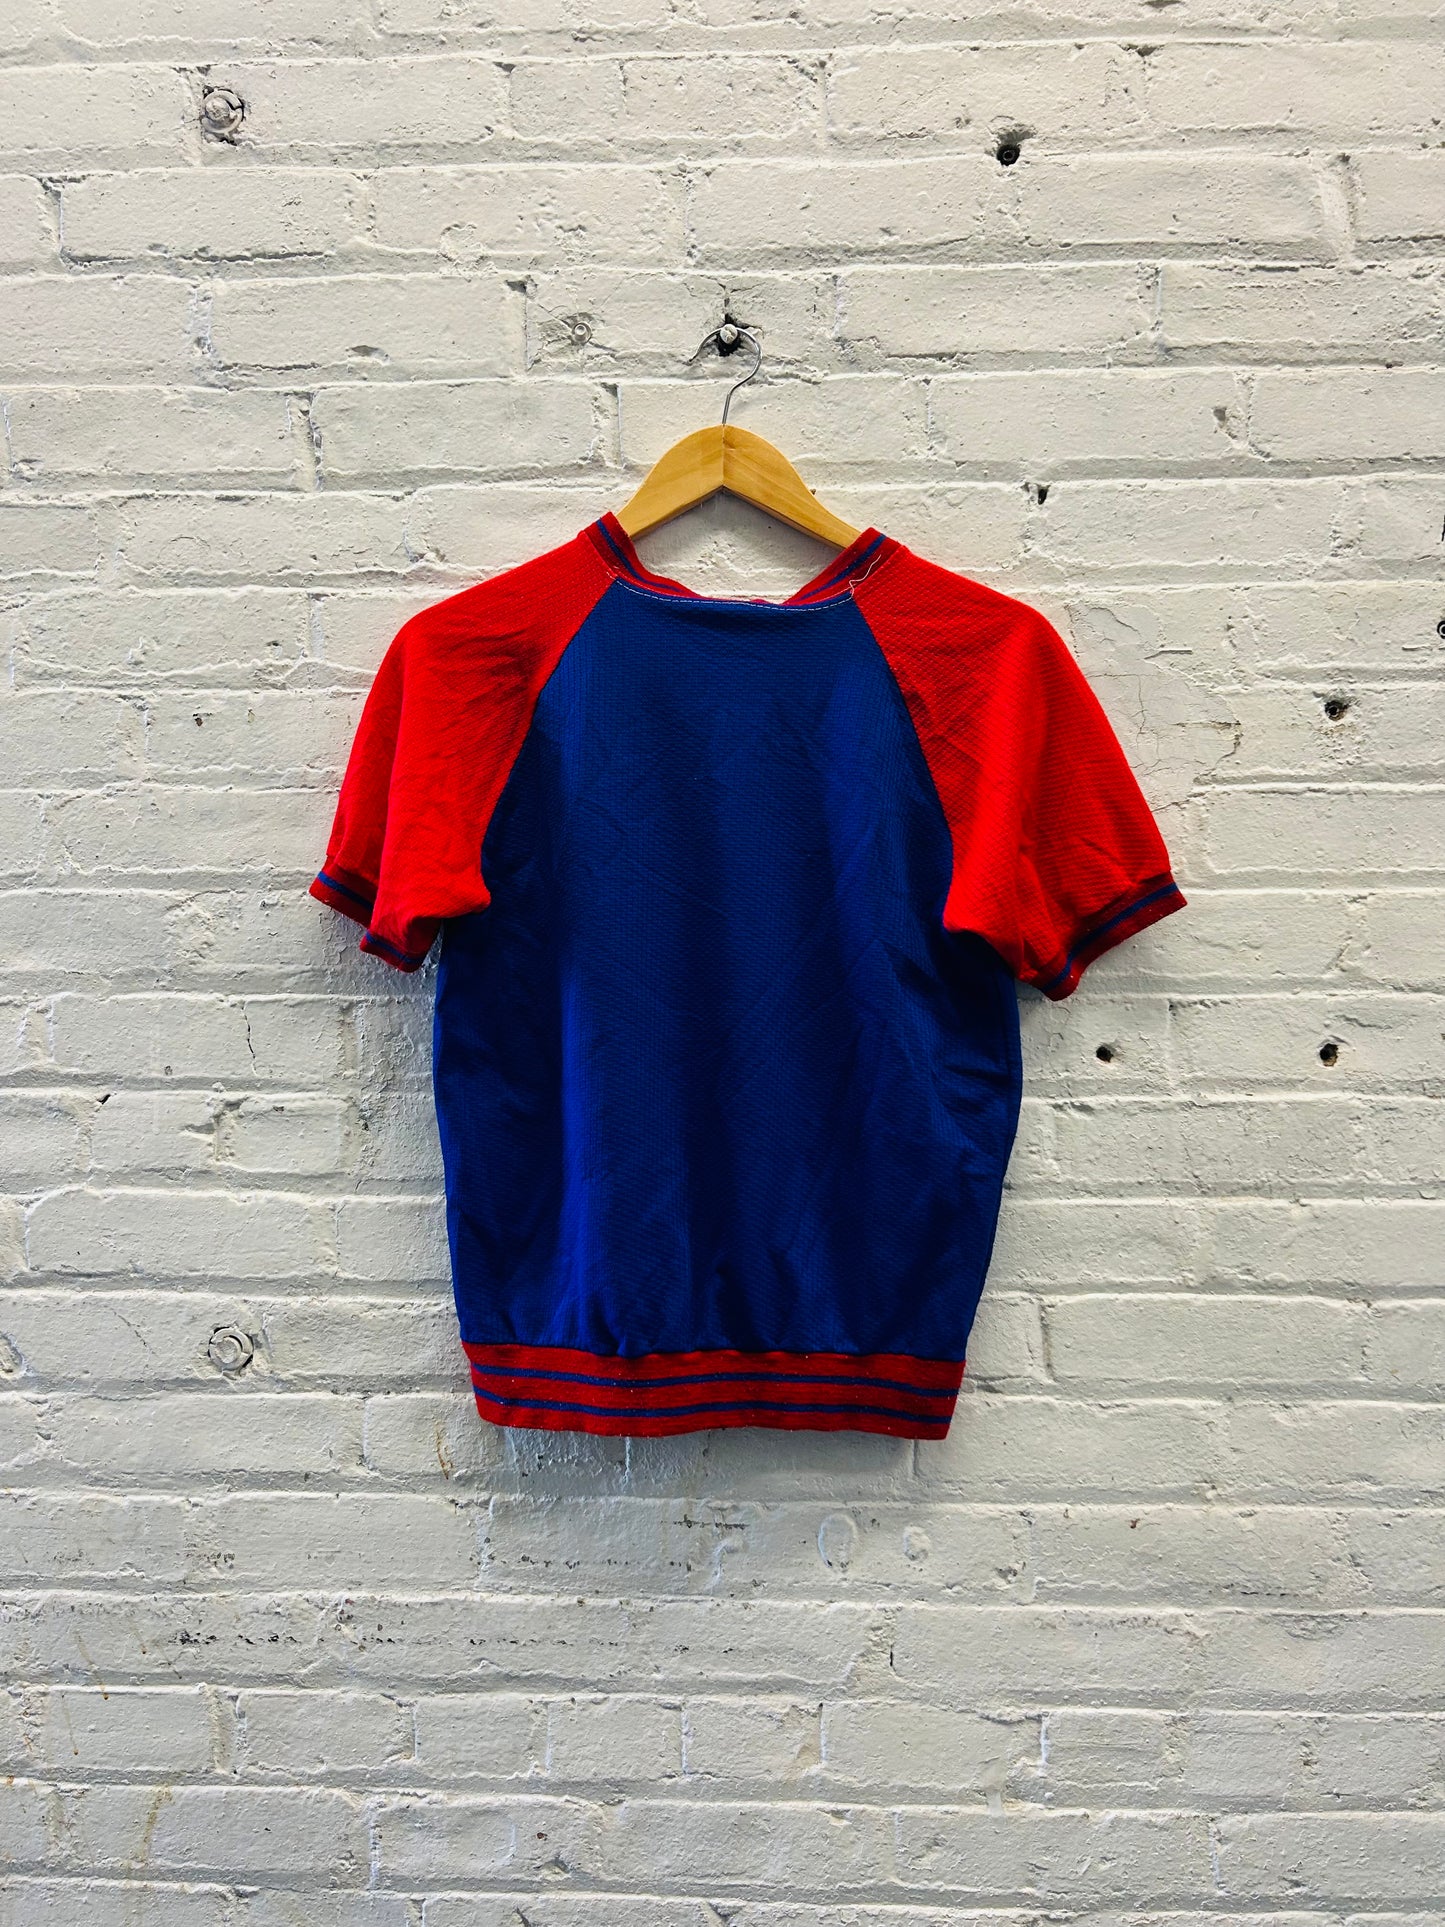 60's Single-Stitched Red and Blue Sports Jersey - Small